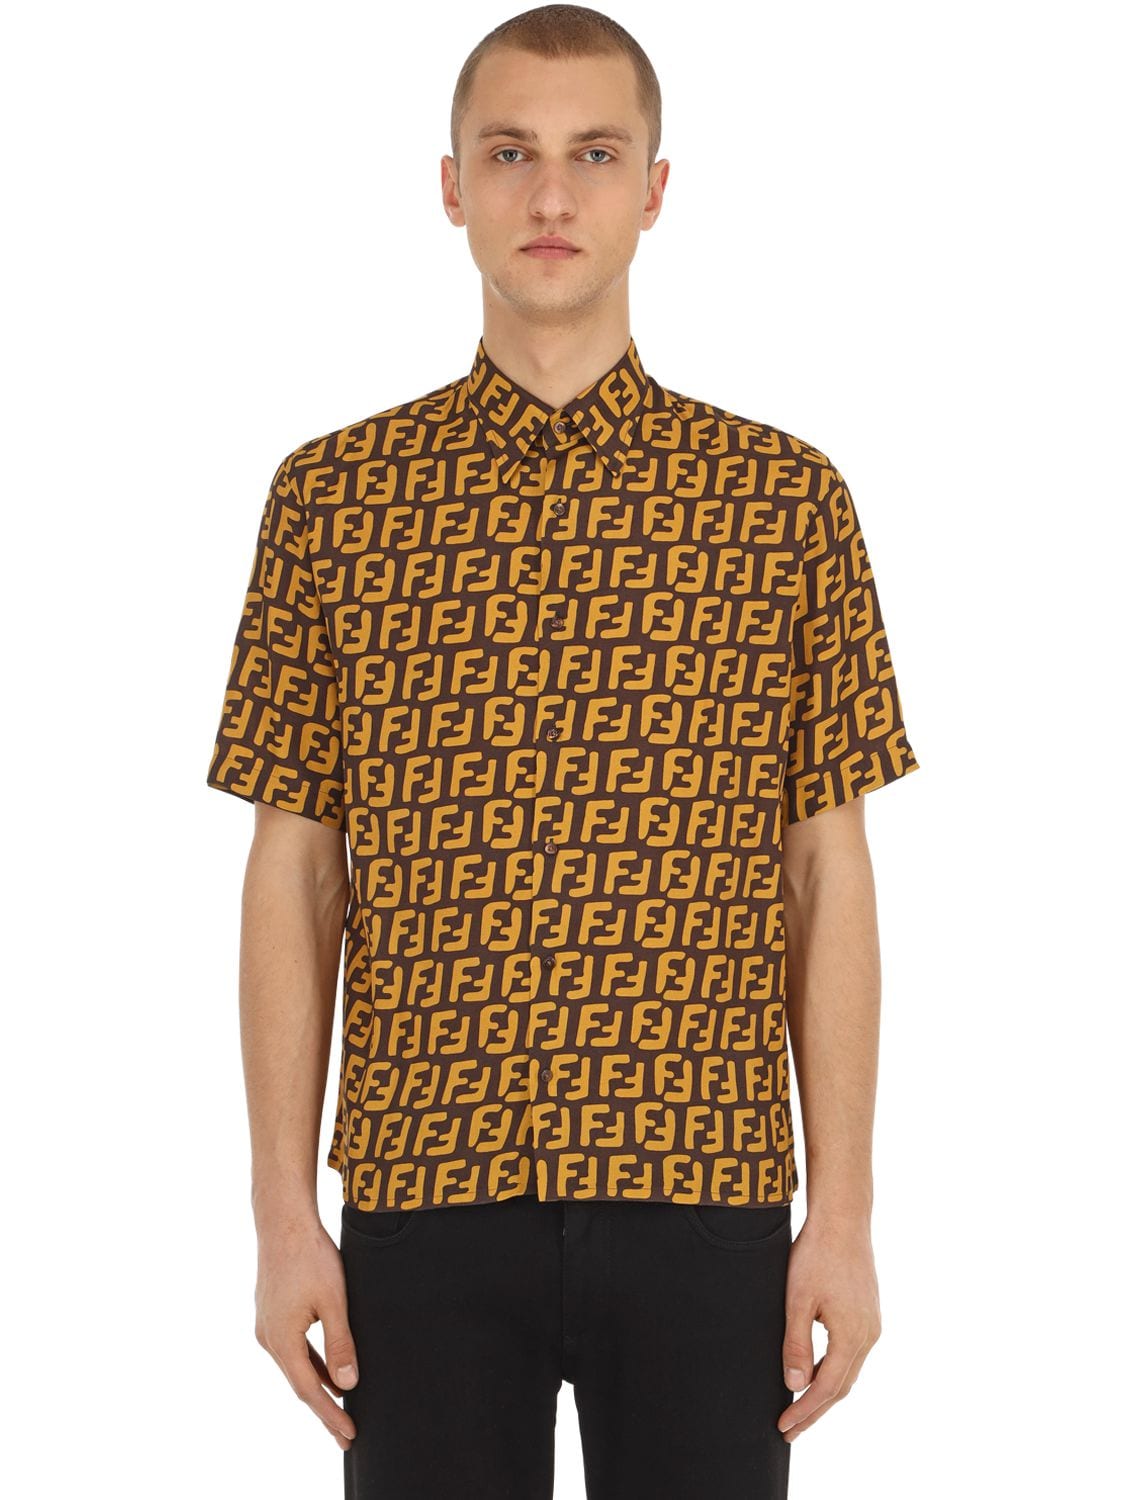 FENDI ALLOVER PRINTED BOWLING SHIRT,69IGE8007-RjE1TVc1